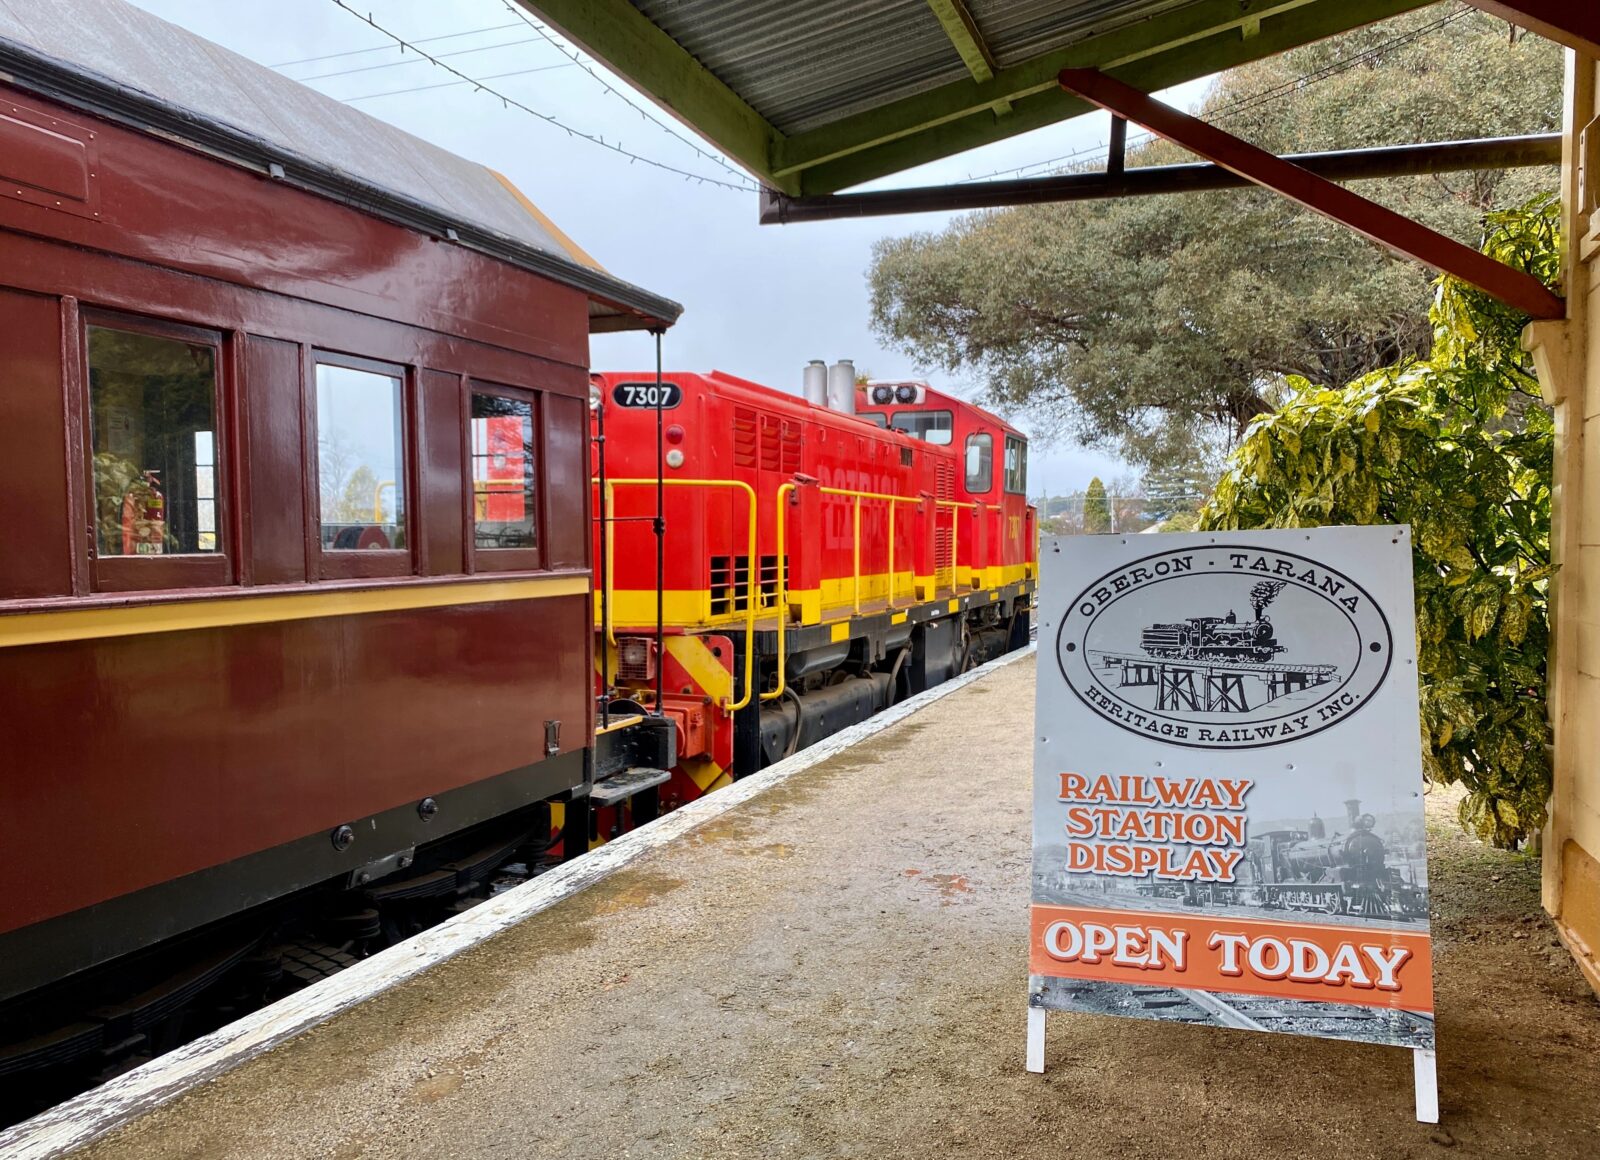 Oberon Station with our Diesel Locomotive and 1897 End Platform Carriage at station